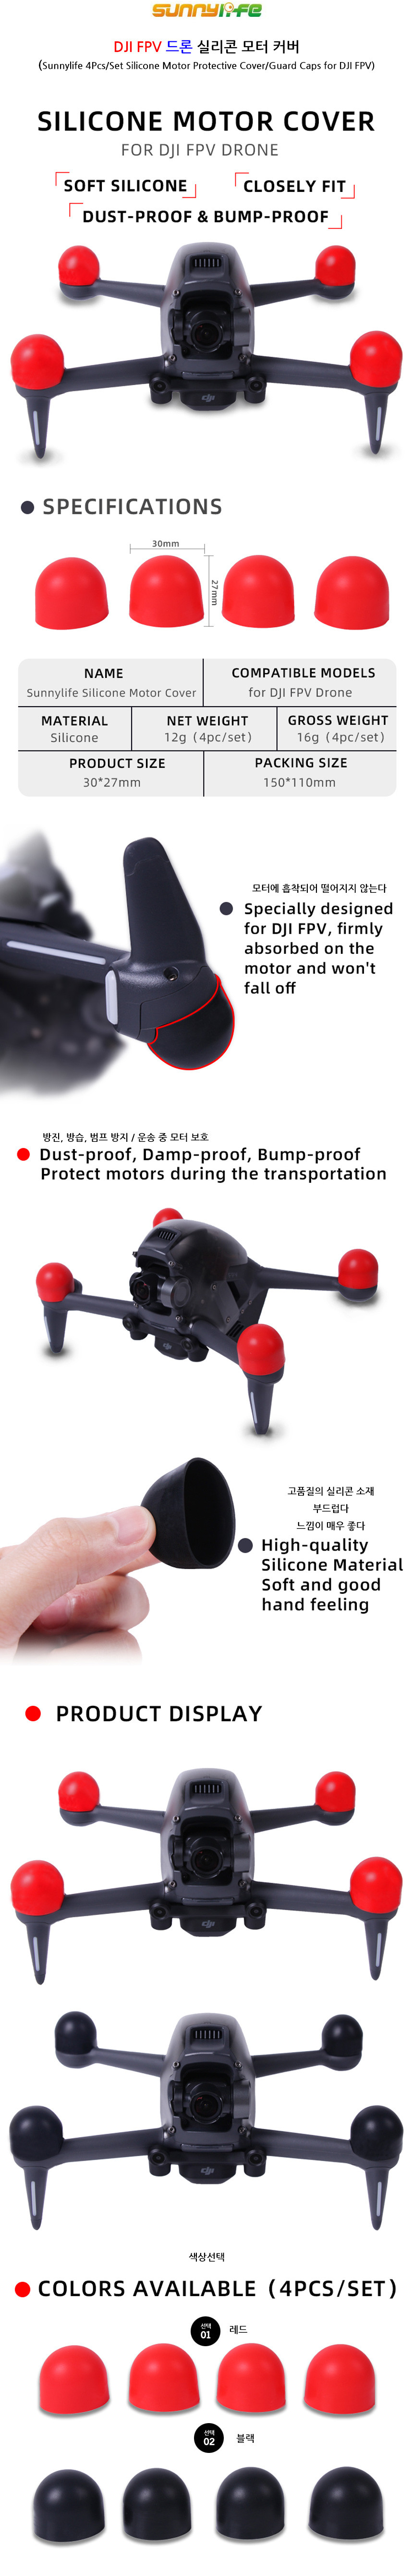 Sunnylife-Silicone-Motor-Cover-for-DJI-FPV-Drone.jpg